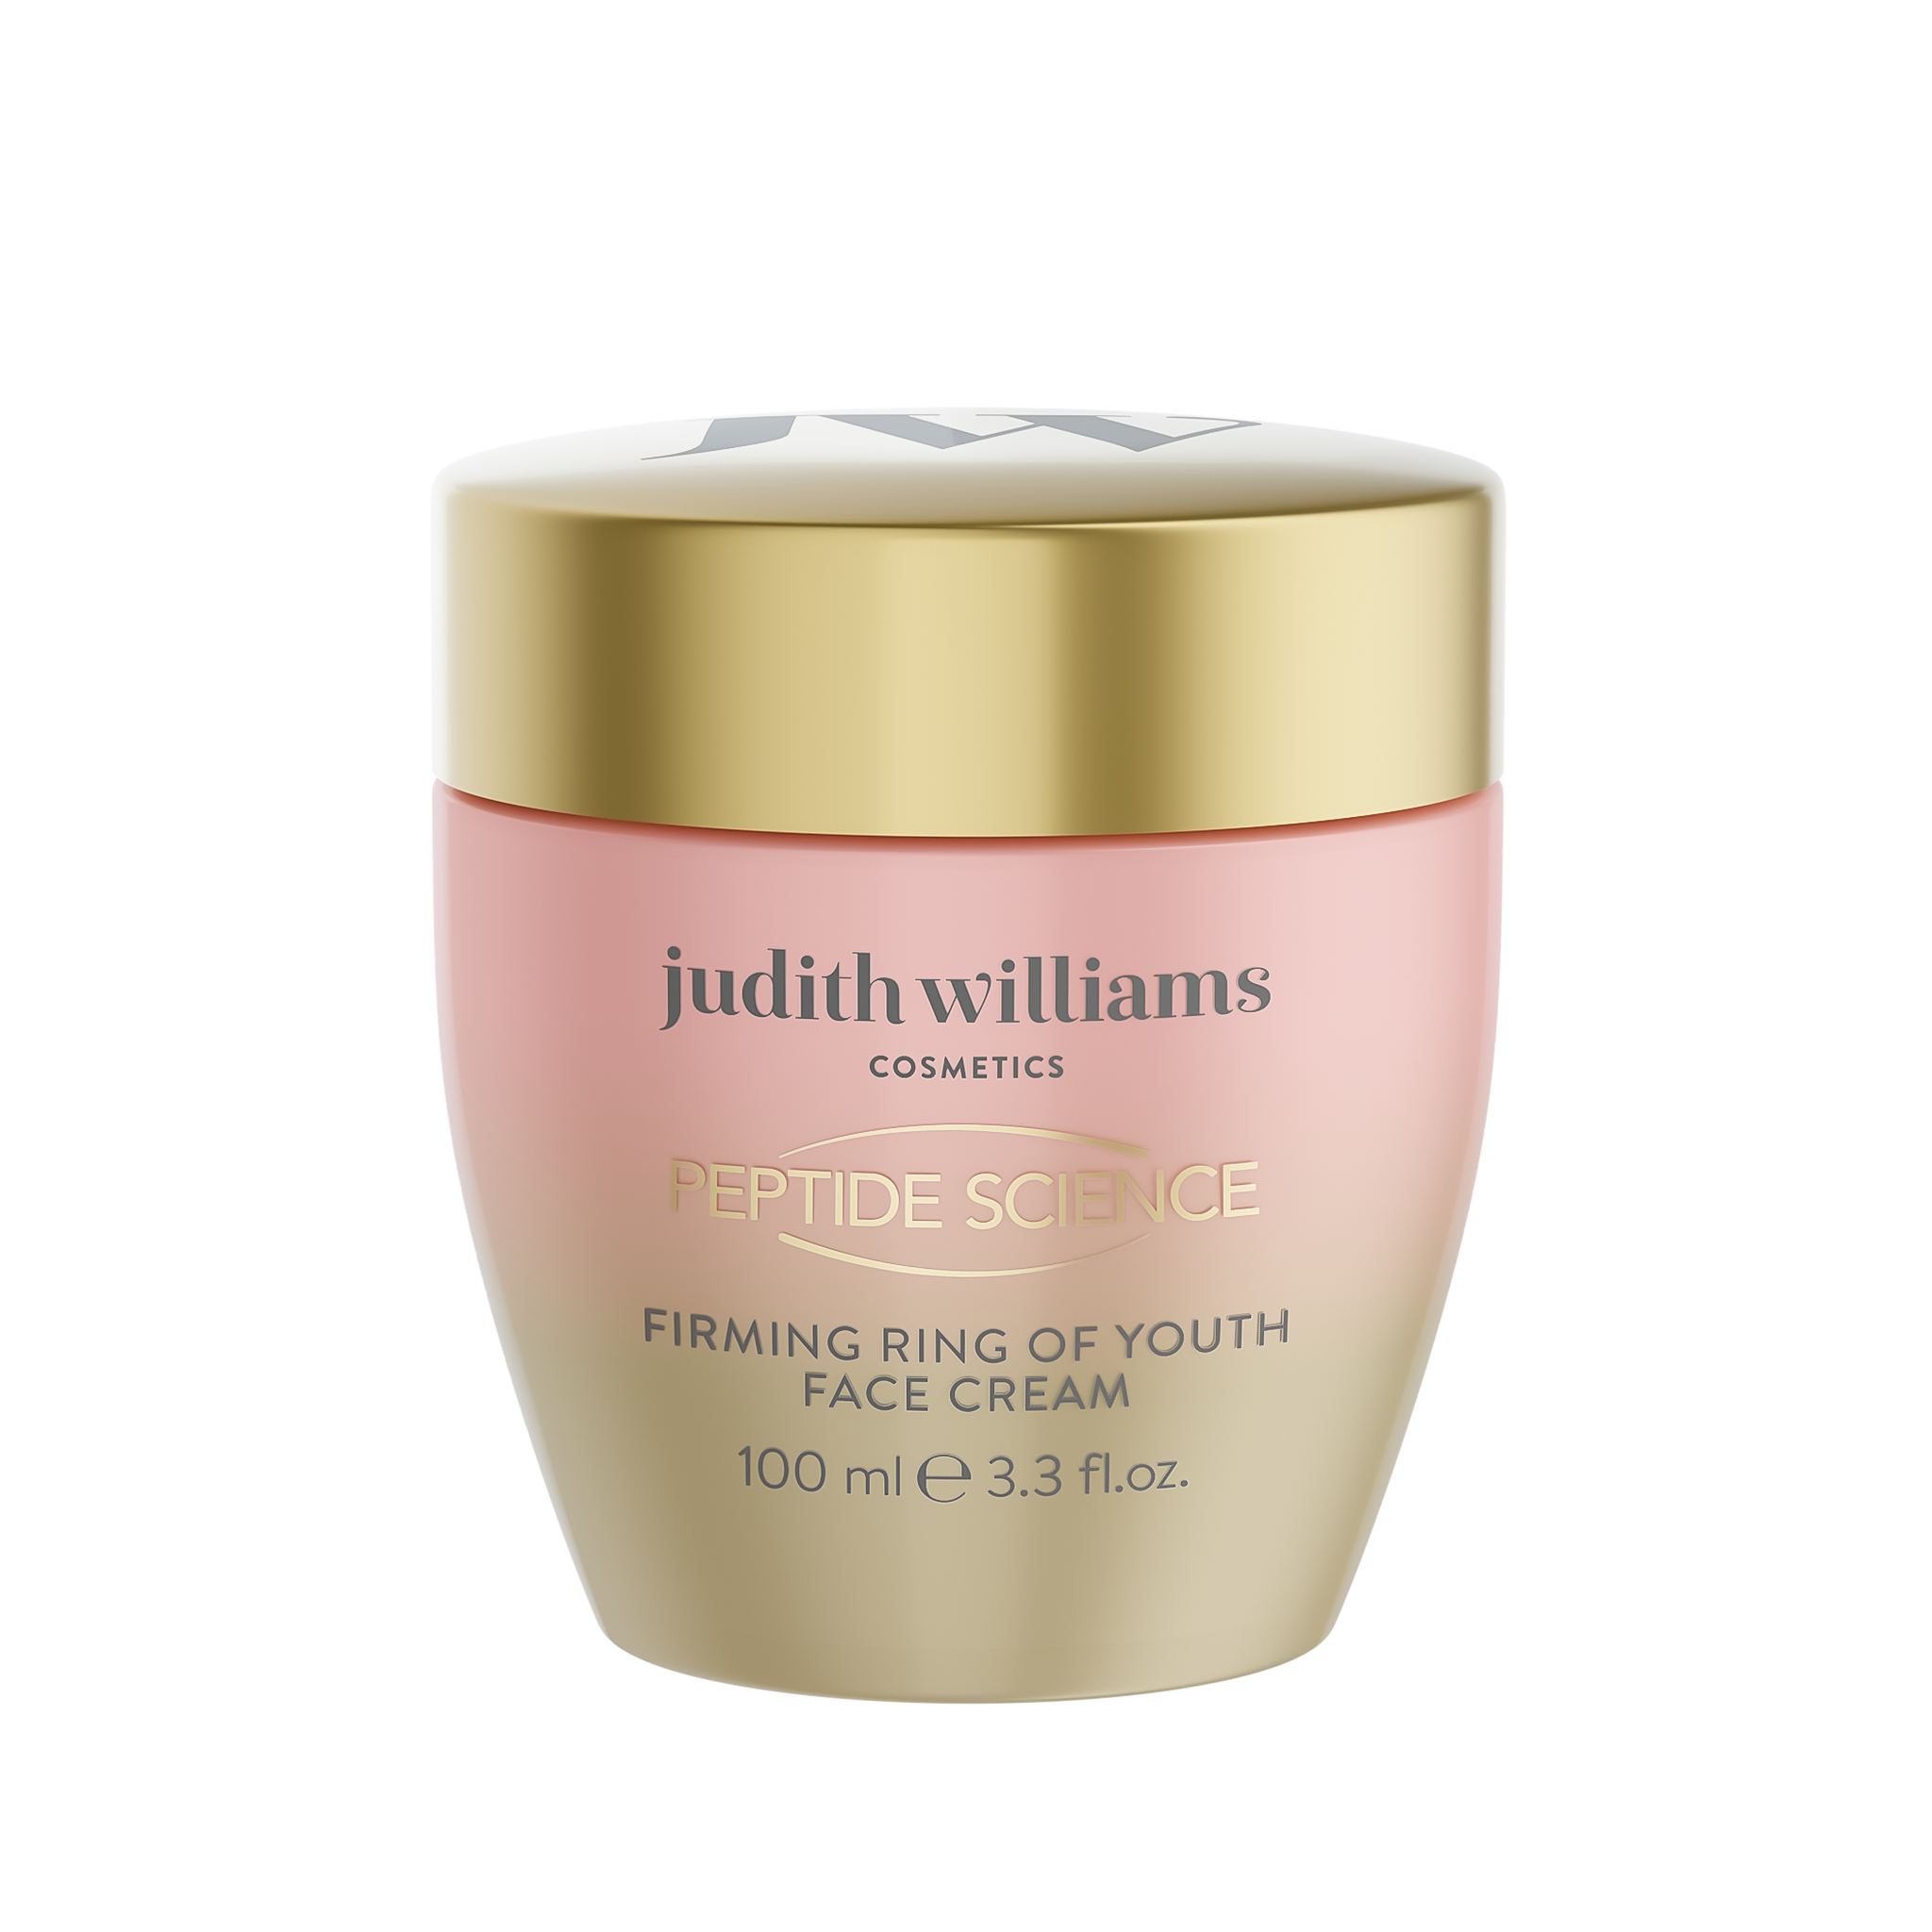 Gesichtscreme | Peptide Science | Firming Ring of Youth Face Cream | Judith Williams